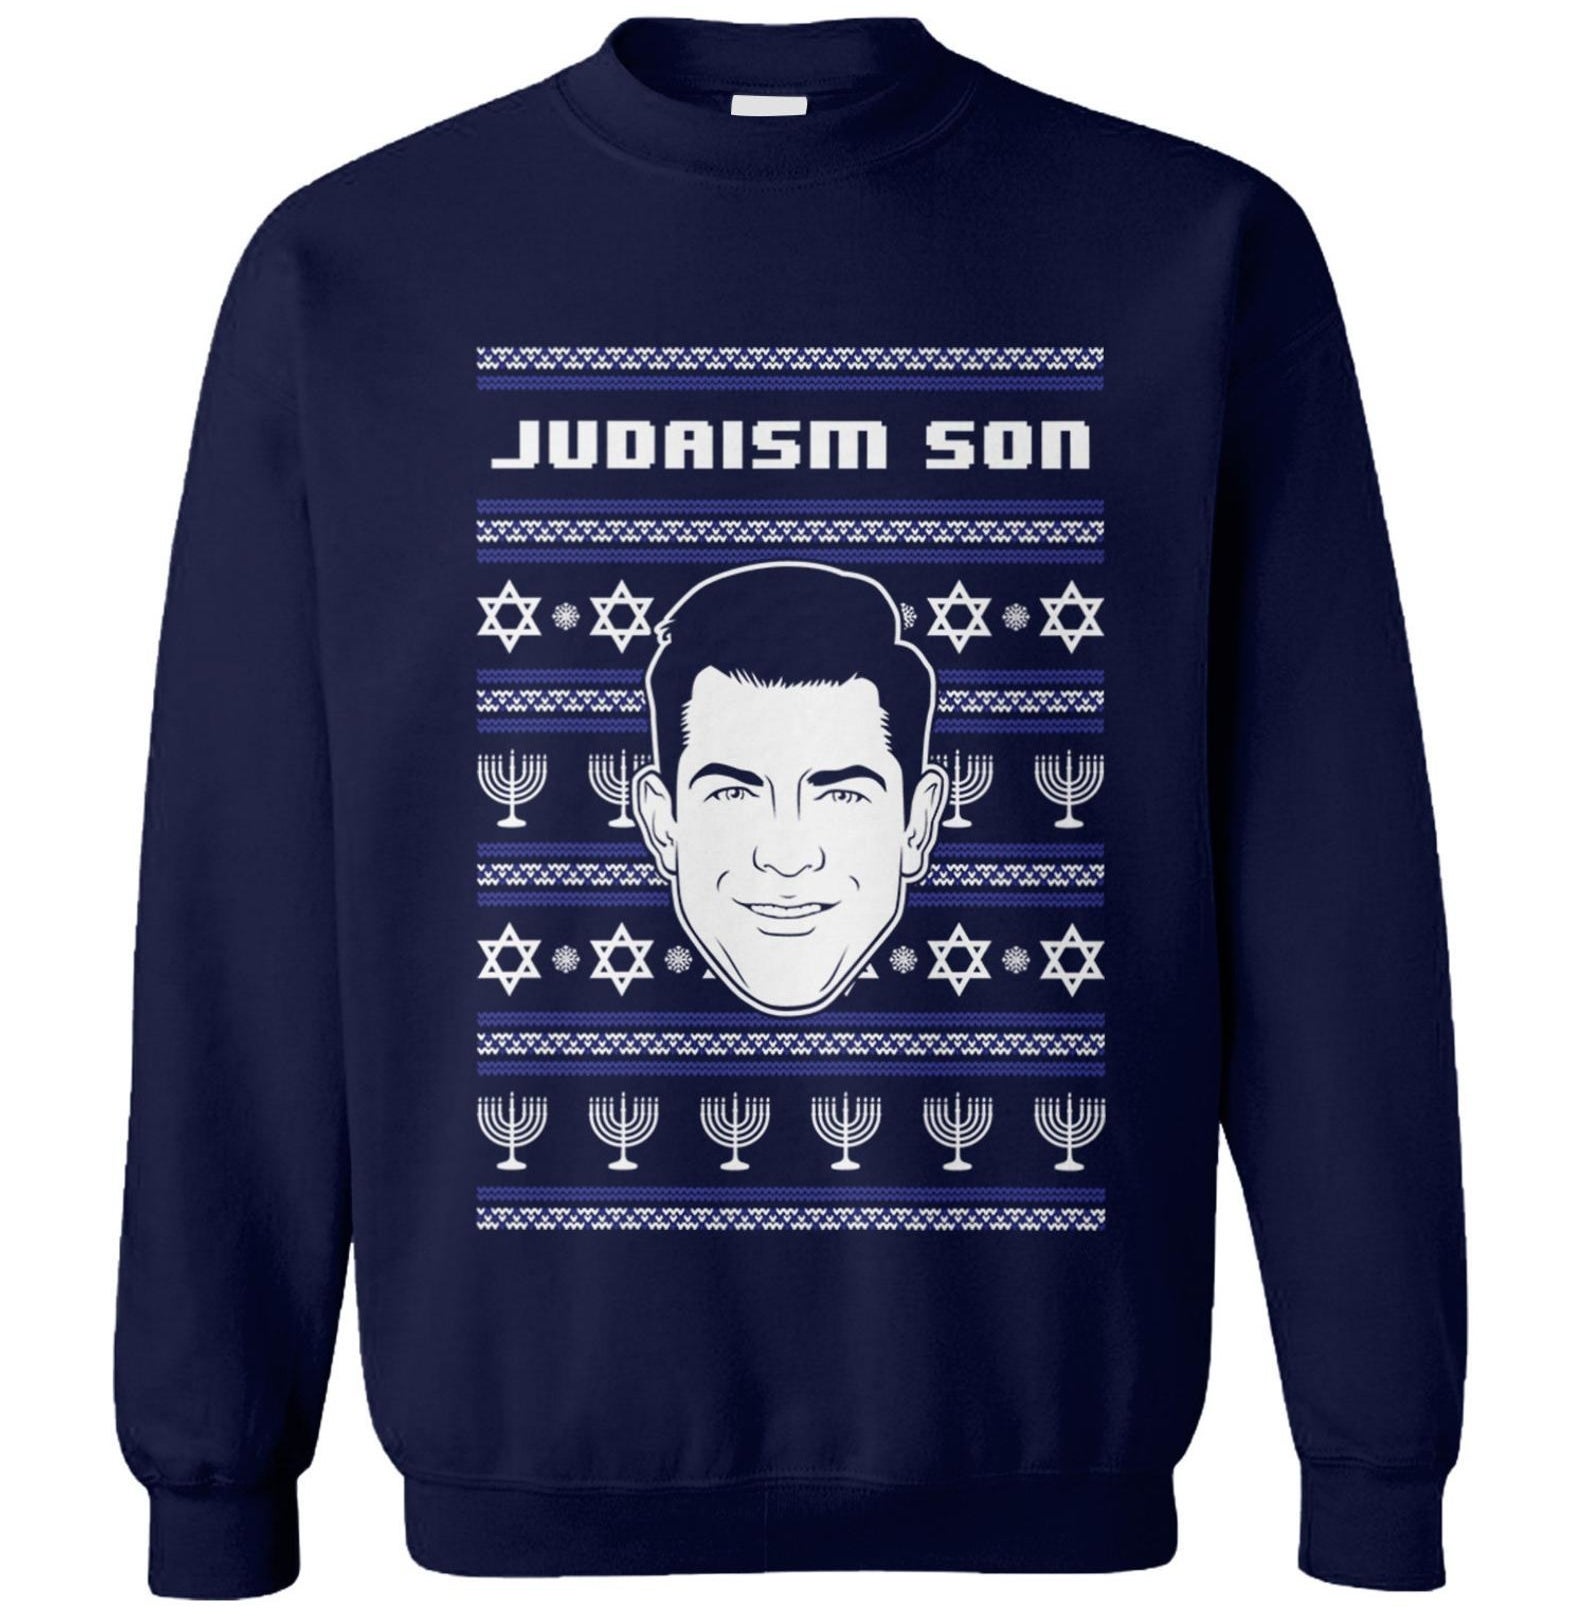 the blue crewneck with prints of menorahs and stars of davids and a graphic of schmidt&#x27;s face